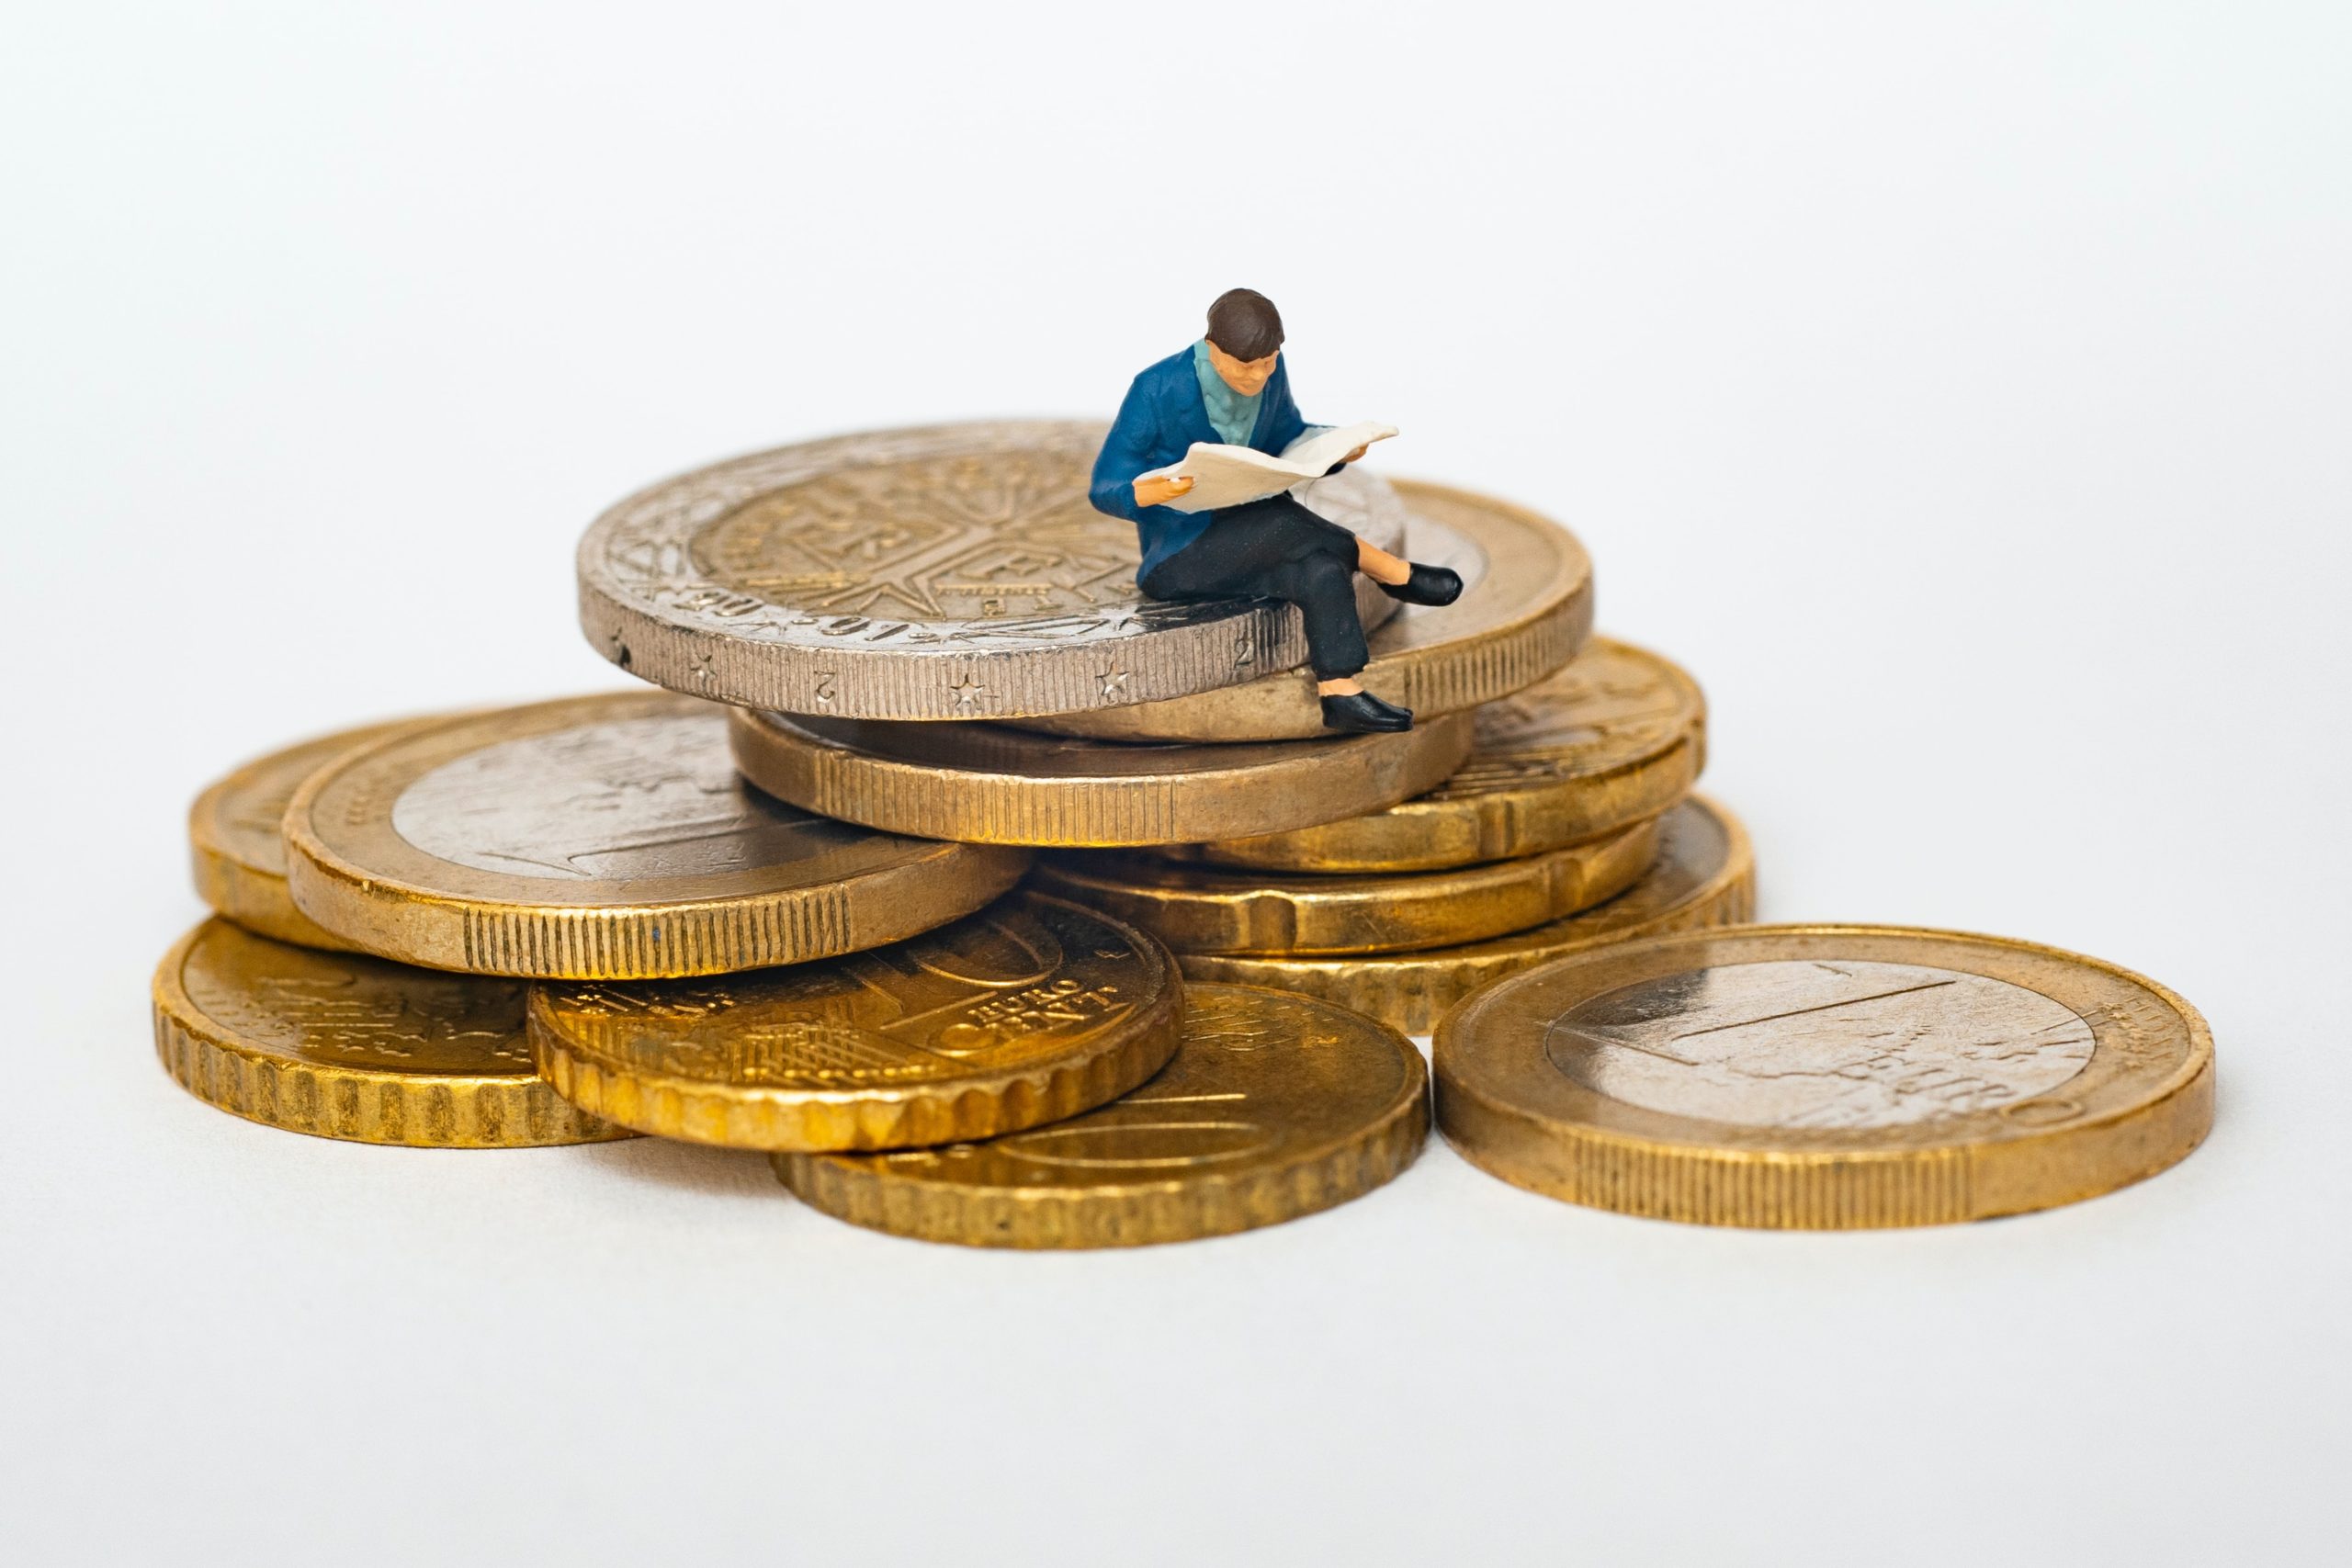 a miniature figure sitting on crypto coins.